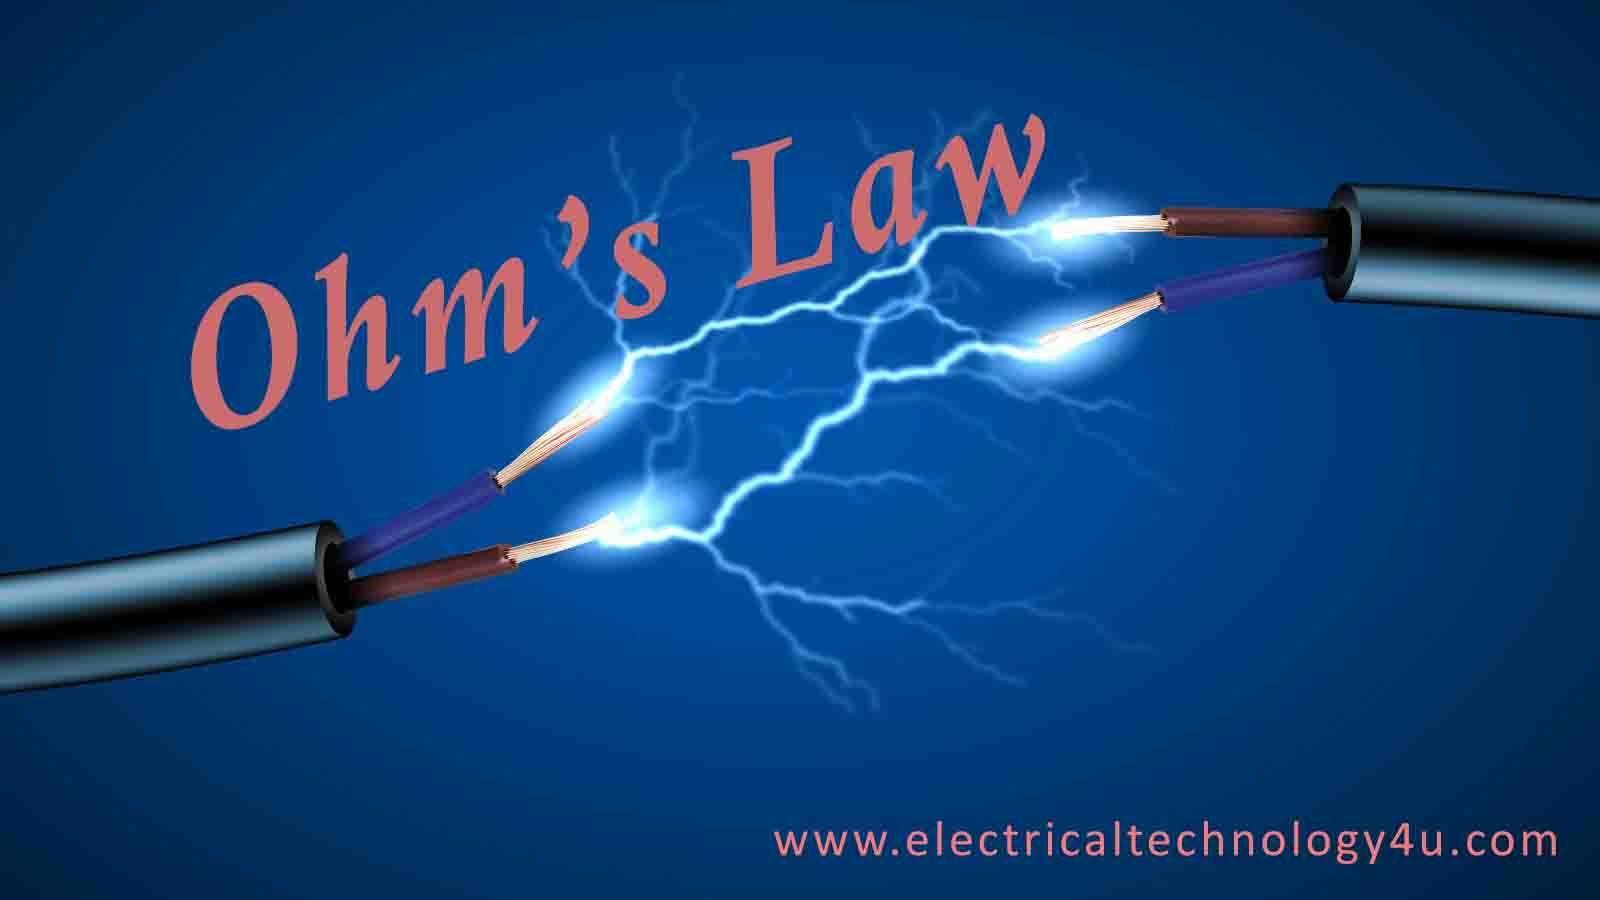 The Ohm's Law Relation. Electrical Technology 4U